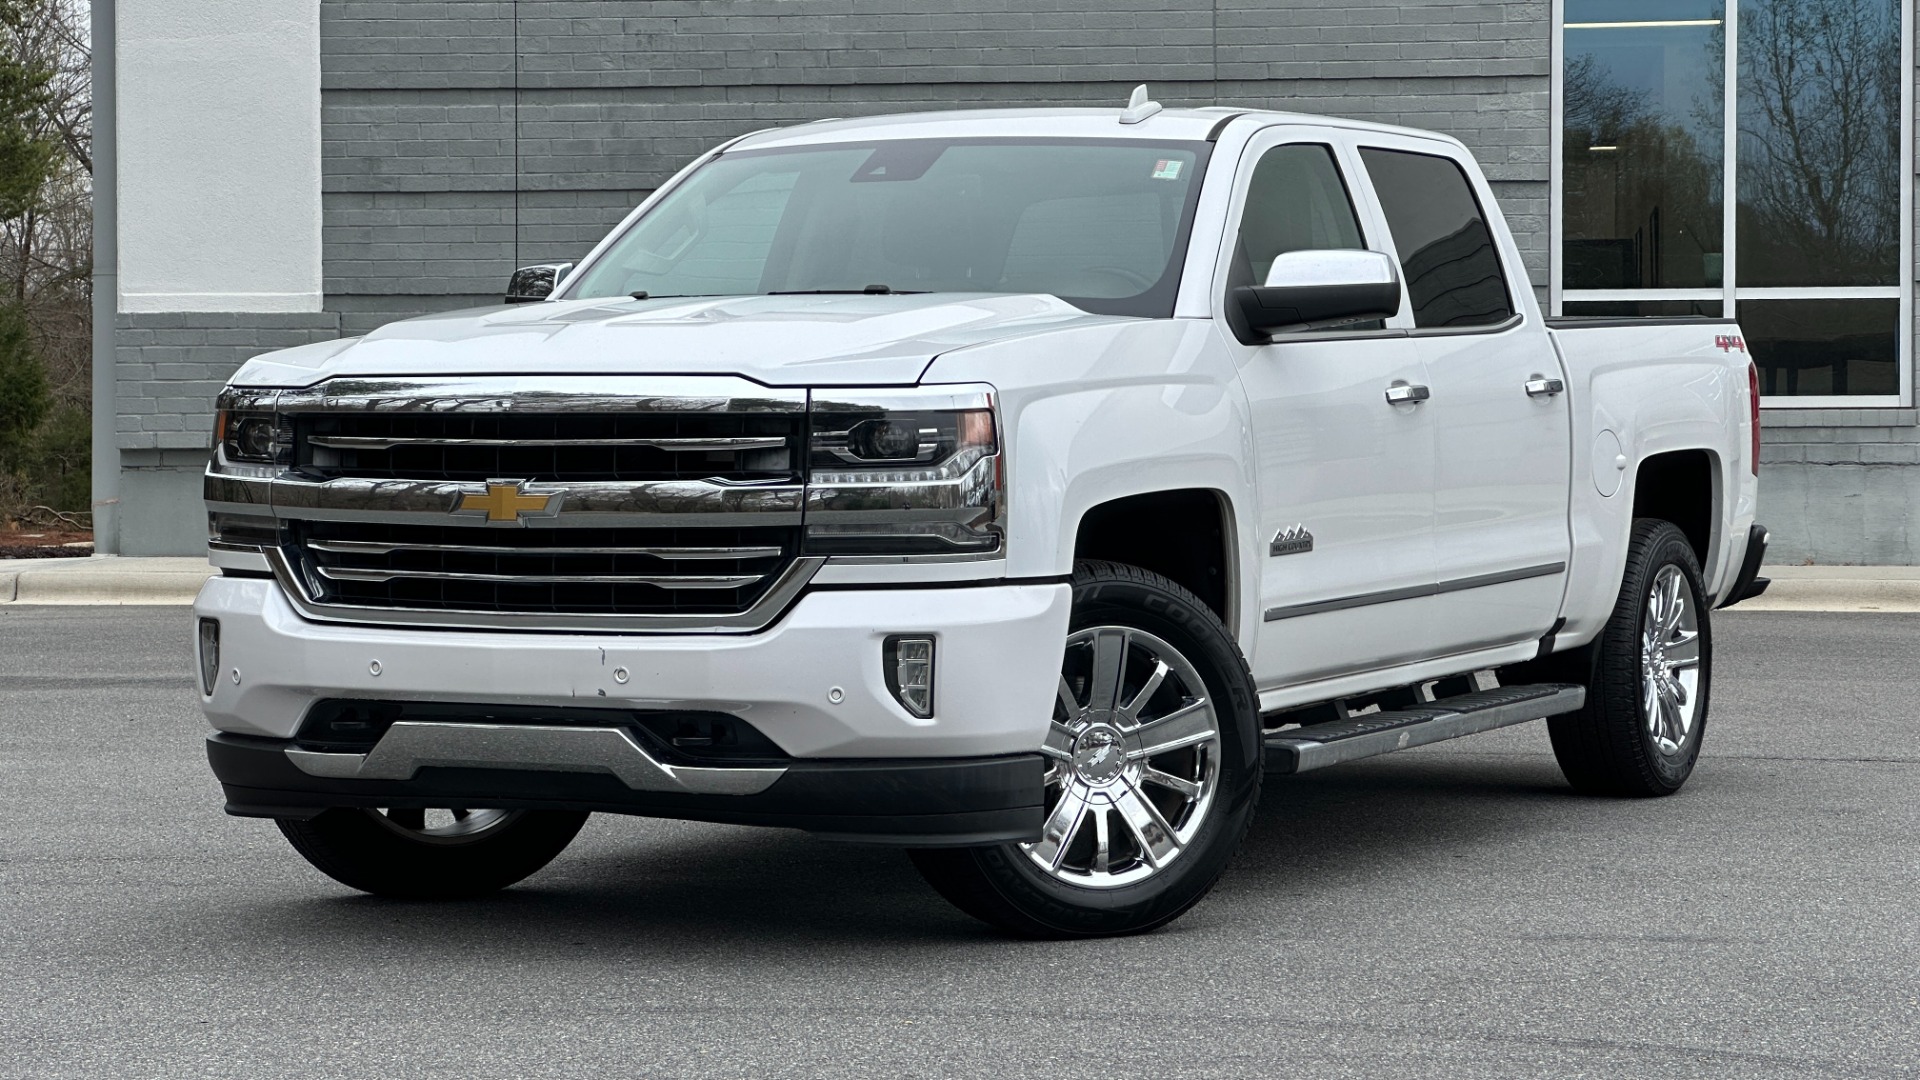 Used 2016 Chevrolet Silverado 1500 HIGH COUNTRY / PREMIUM PACKAGE / PEARL PAINT / SUNROOF / 4X4 for sale Sold at Formula Imports in Charlotte NC 28227 1